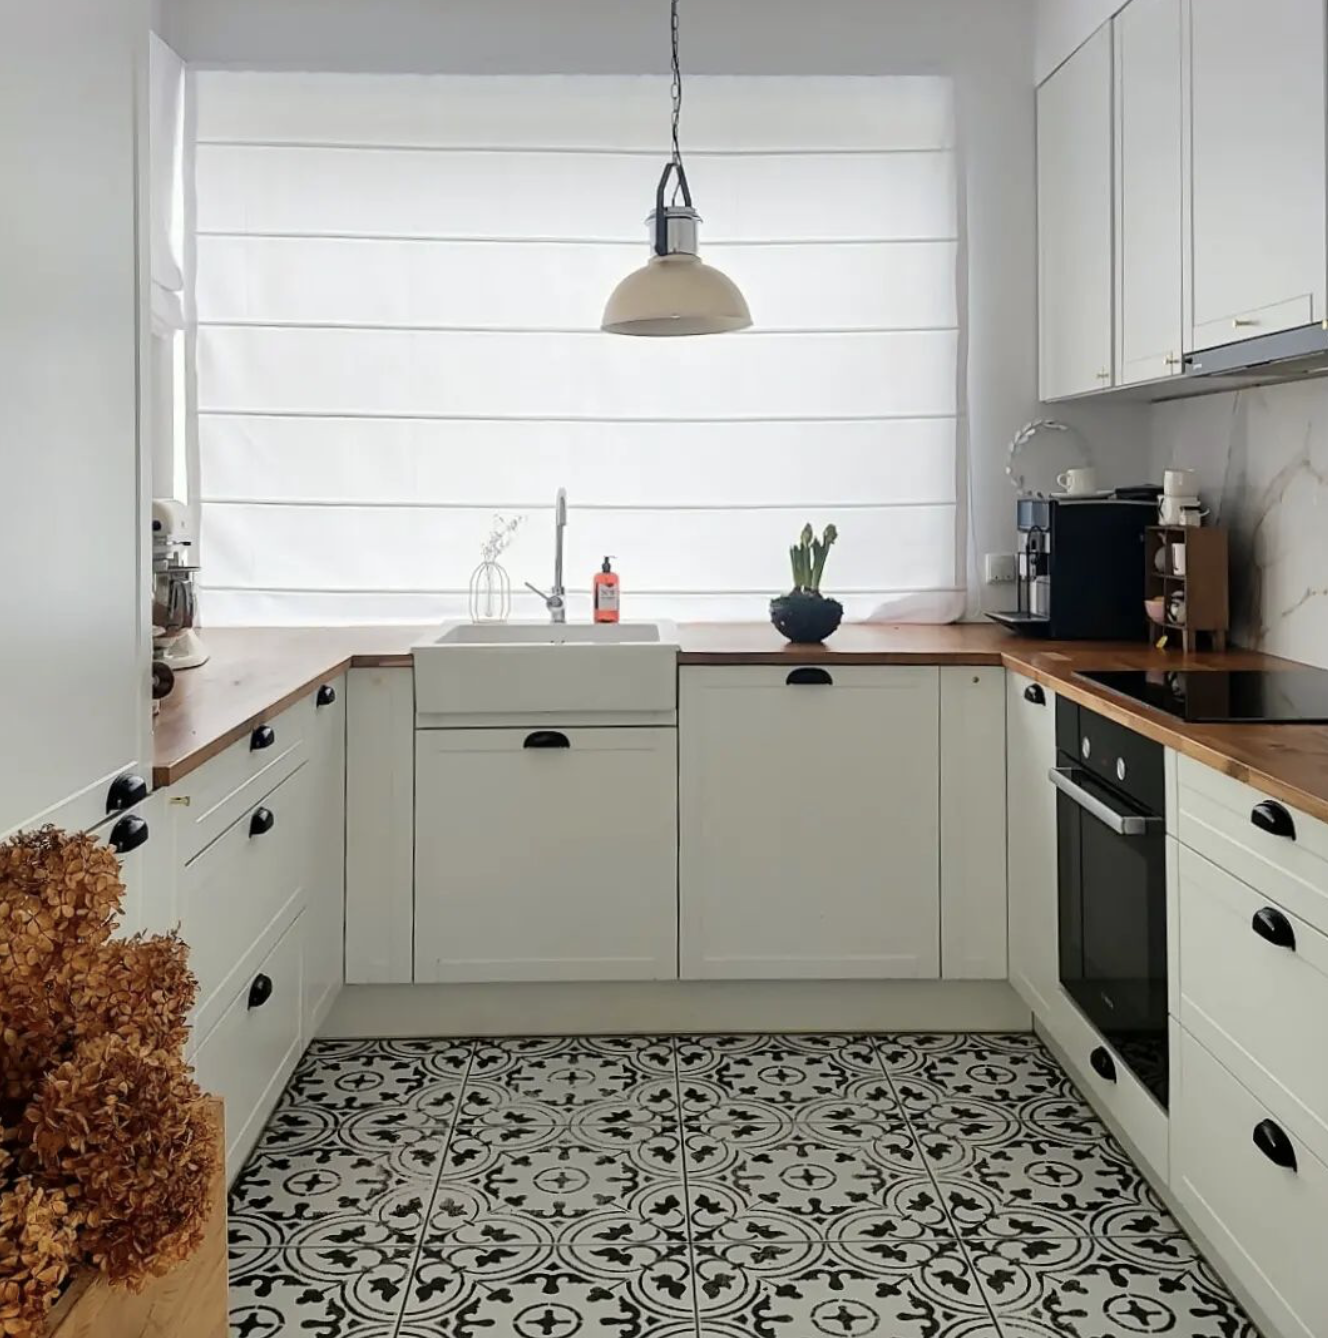 U-Shaped Kitchen With Colorful Flooring